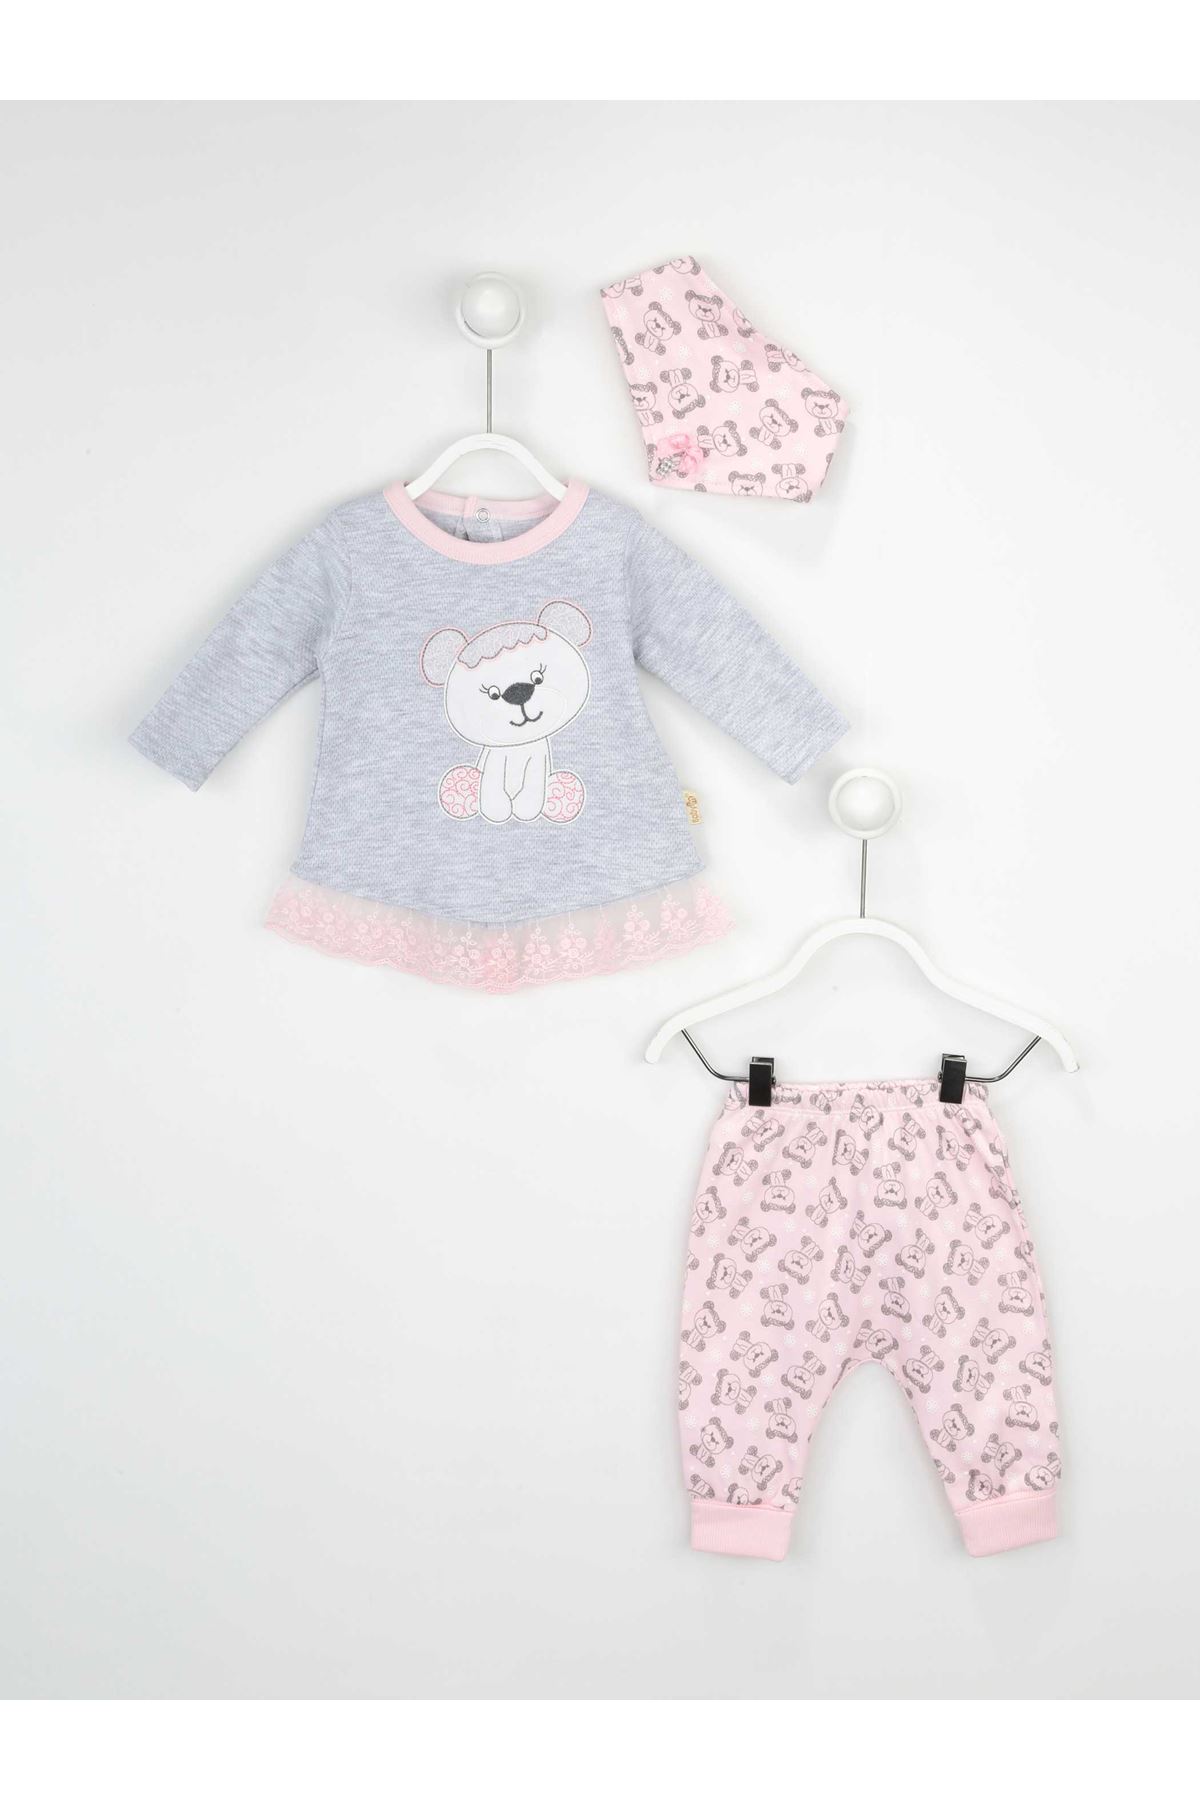 Grey Pink Baby Girl Daily 3 Piece Suit Set Cotton Daily Seasonal Casual Wear Girls Babies Suit Outfit Models